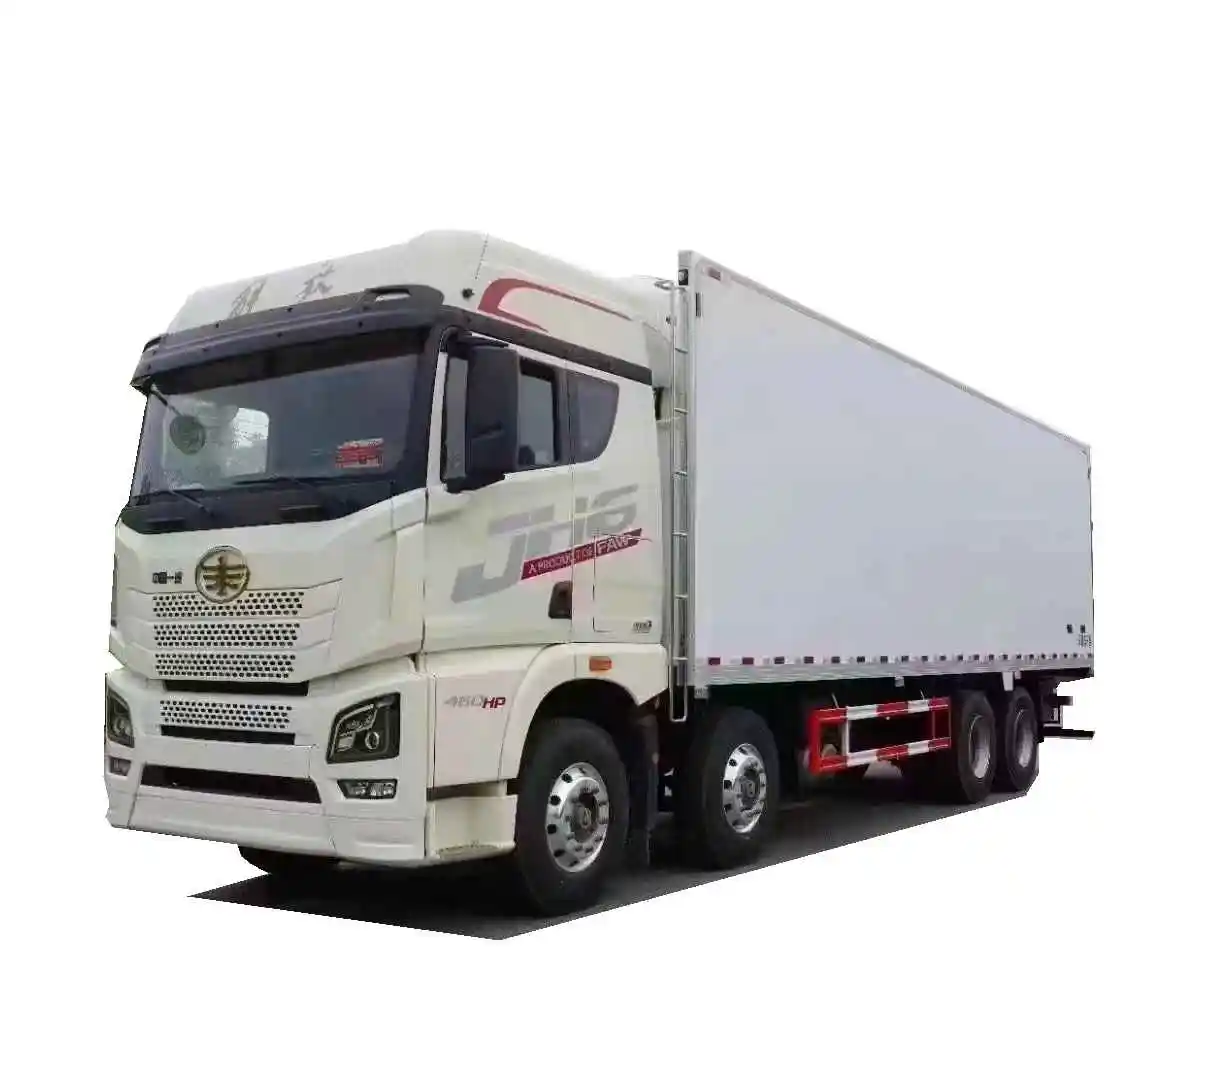 used refrigerated truck FAW RHD LHD Vehicle refrigerated small trucks 2ton 3ton China Hot Selling